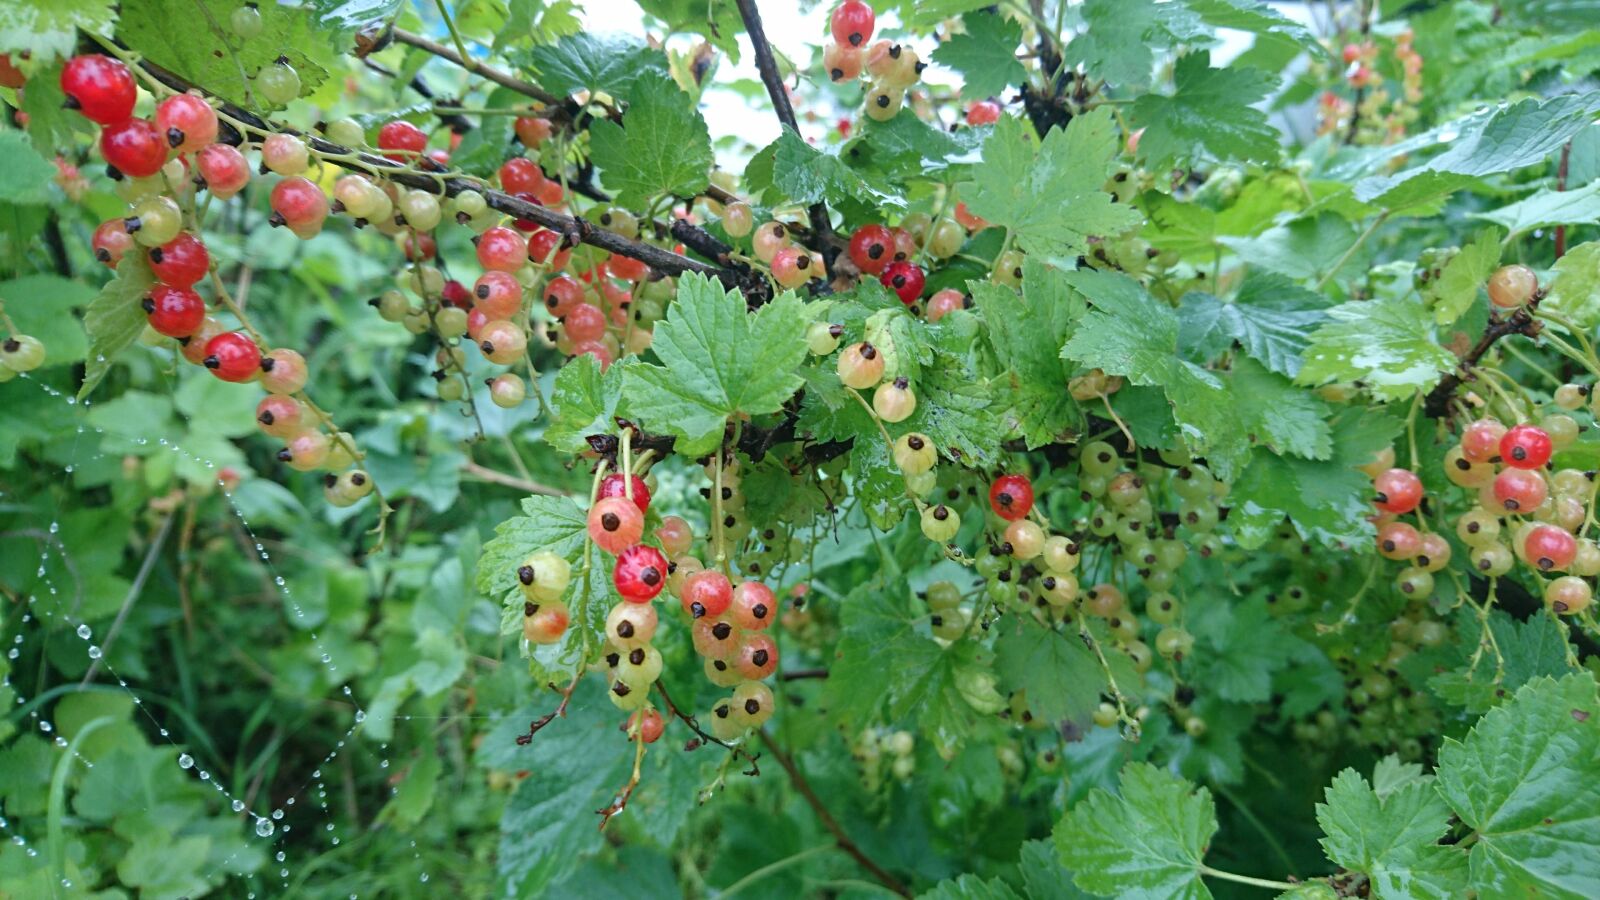 Sony Xperia Z5 Compact sample photo. Currant, red currant, food photography